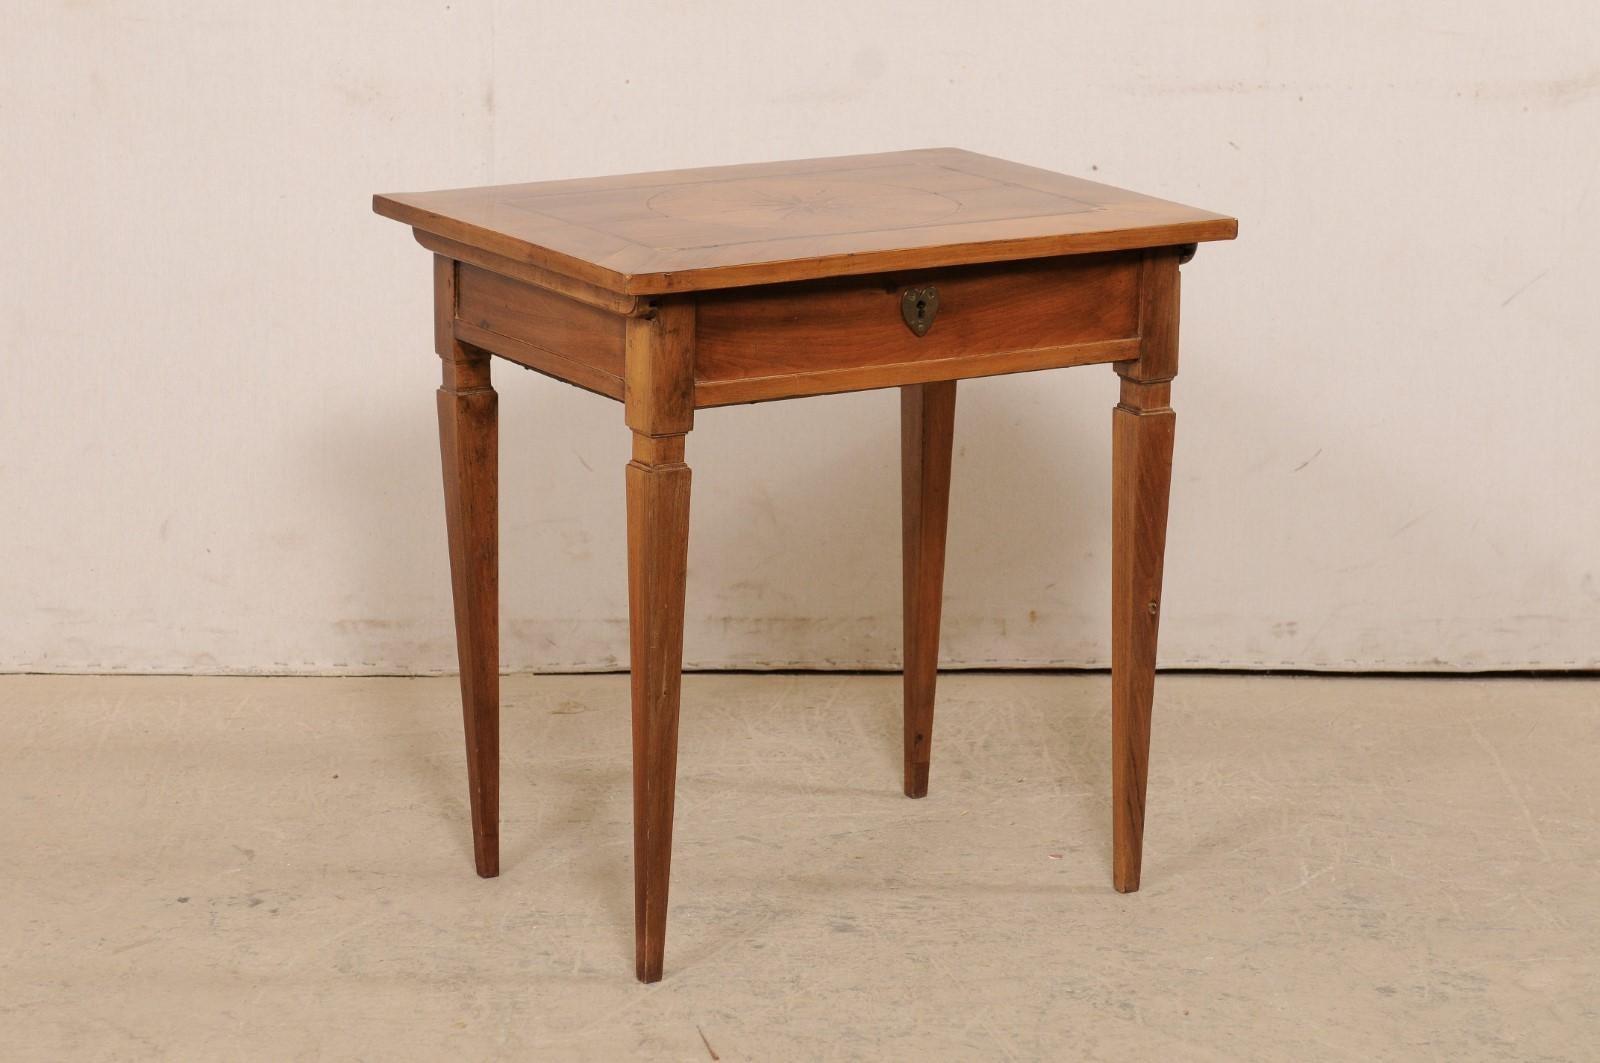 An Italian smaller-sized writing desk with storage hidden beneath top from the 19th century. This super cute desk, or occasional table from Italy, is adorn with beautiful inlay on the top with a circular medallion with flower head at it's center and